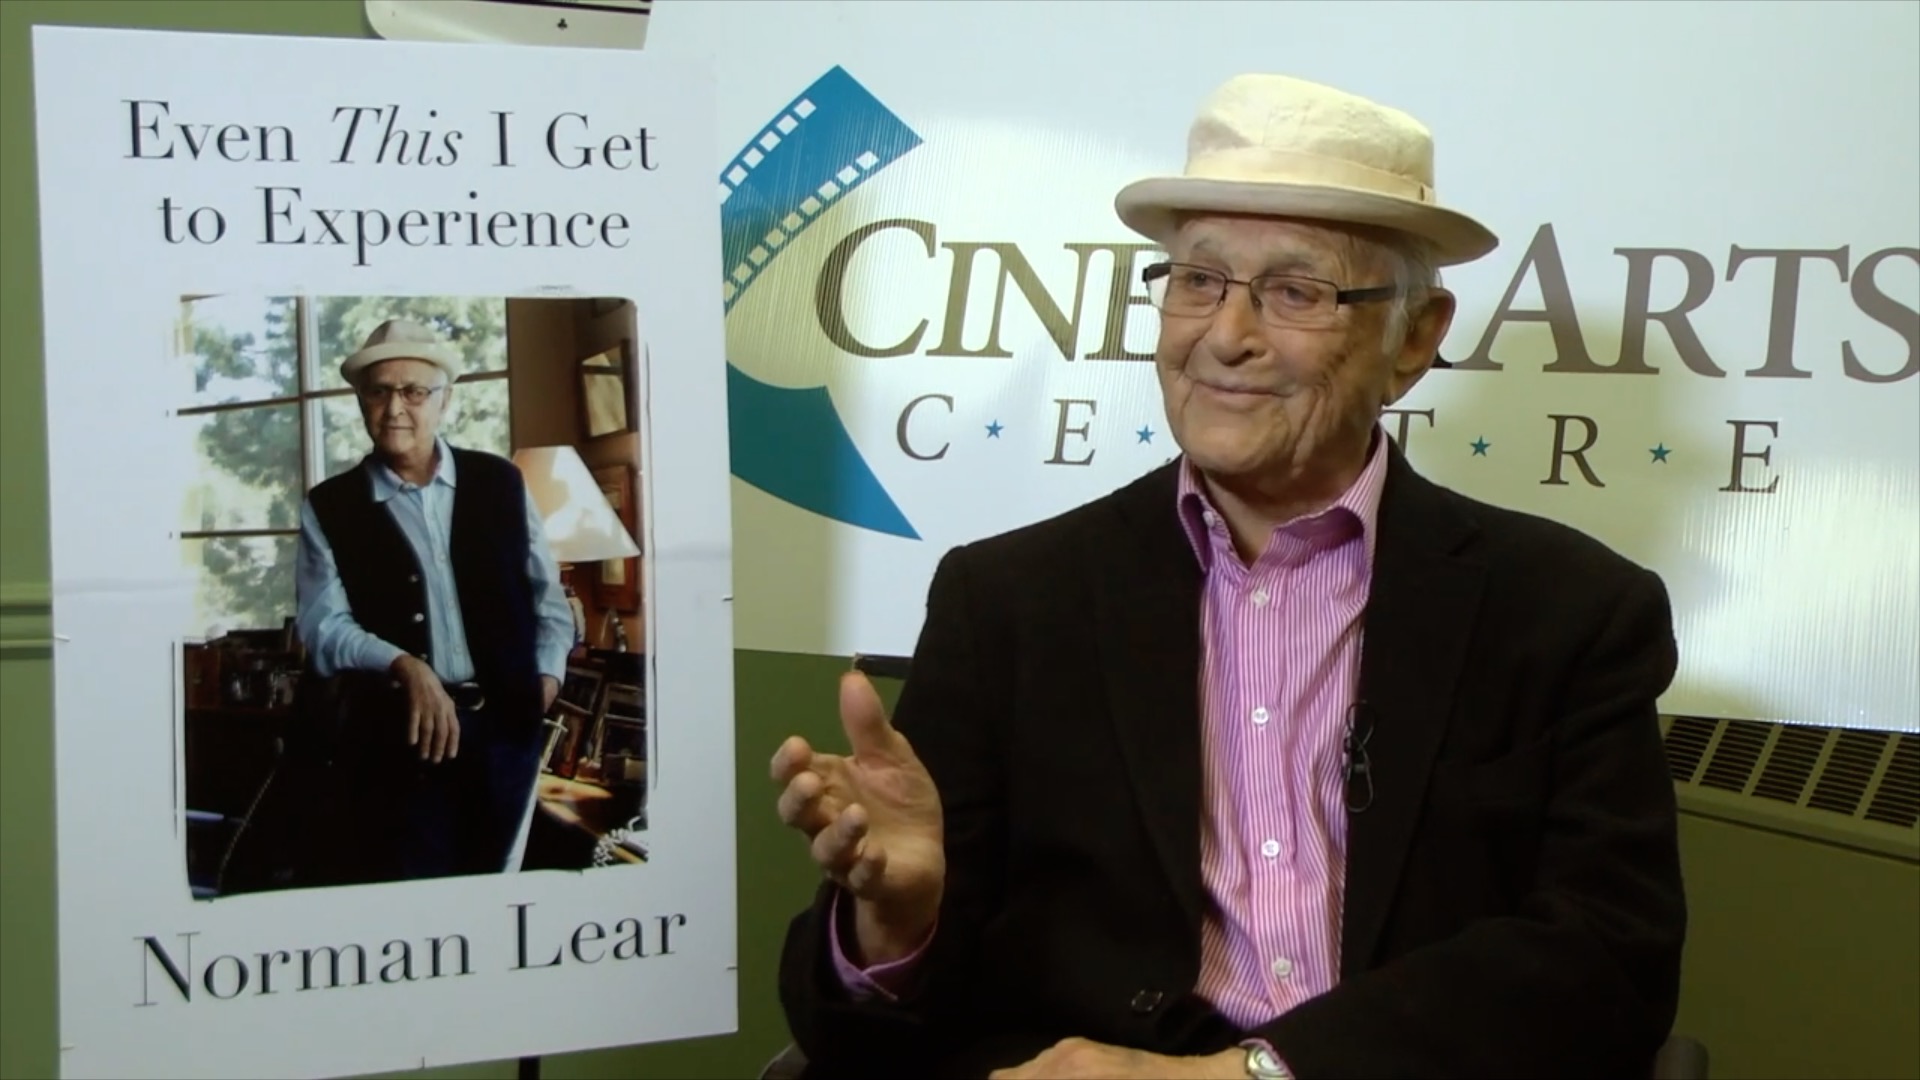 Legendary TV Producer Norman Lear at the Cinema Arts Centre